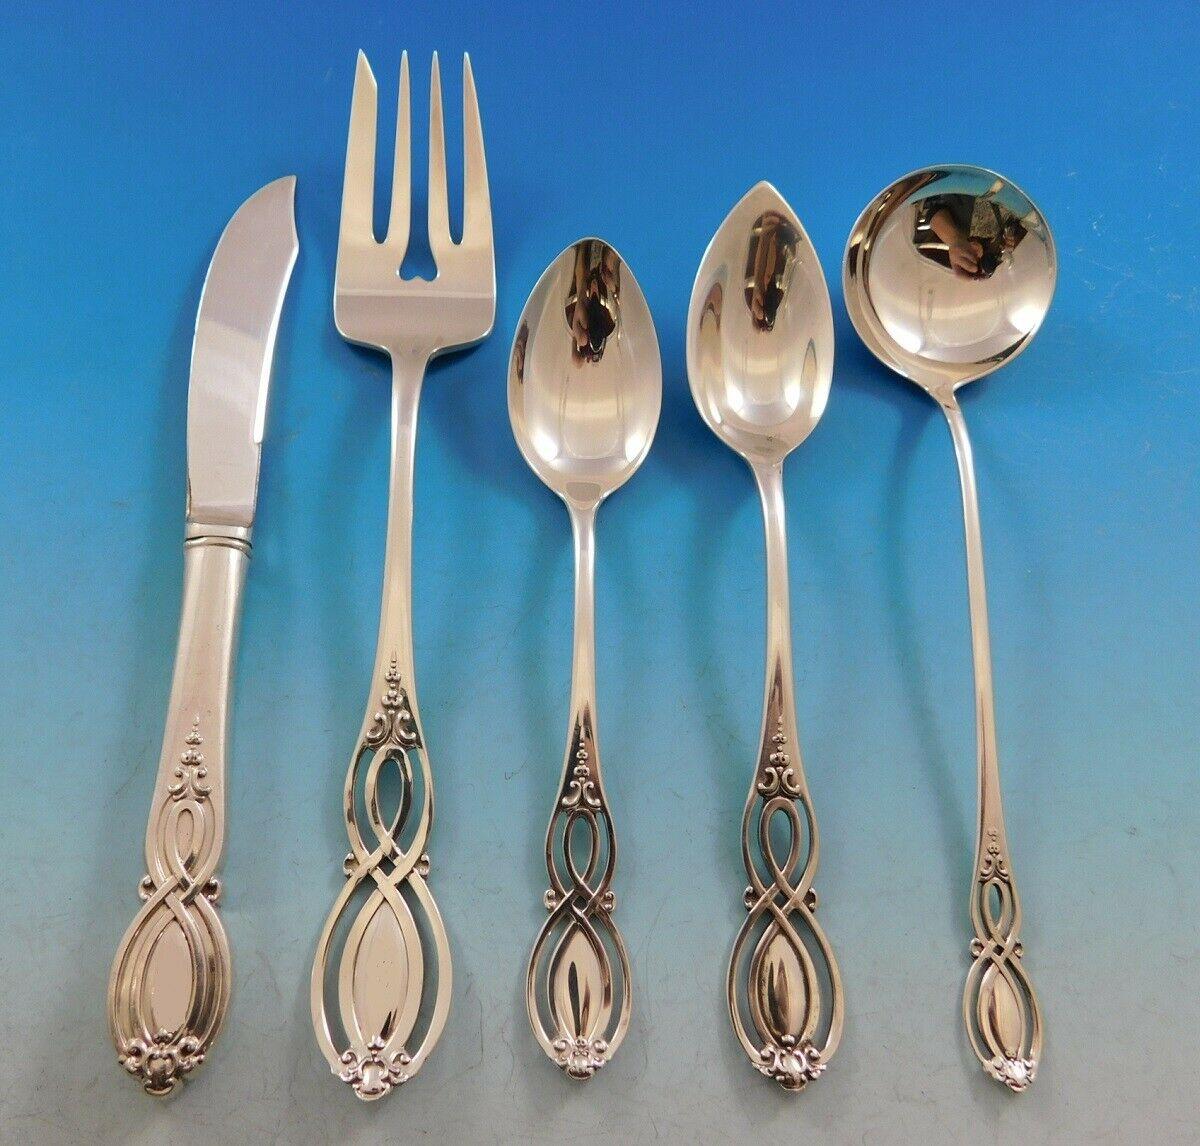 Monumental rare Chippendale old by Alvin, circa 1900, sterling silver flatware set, 206 pieces. This pattern features a unique pierced handle and fabulous serving pieces. This set includes:

10 dinner size knives, french blades, 9 3/4